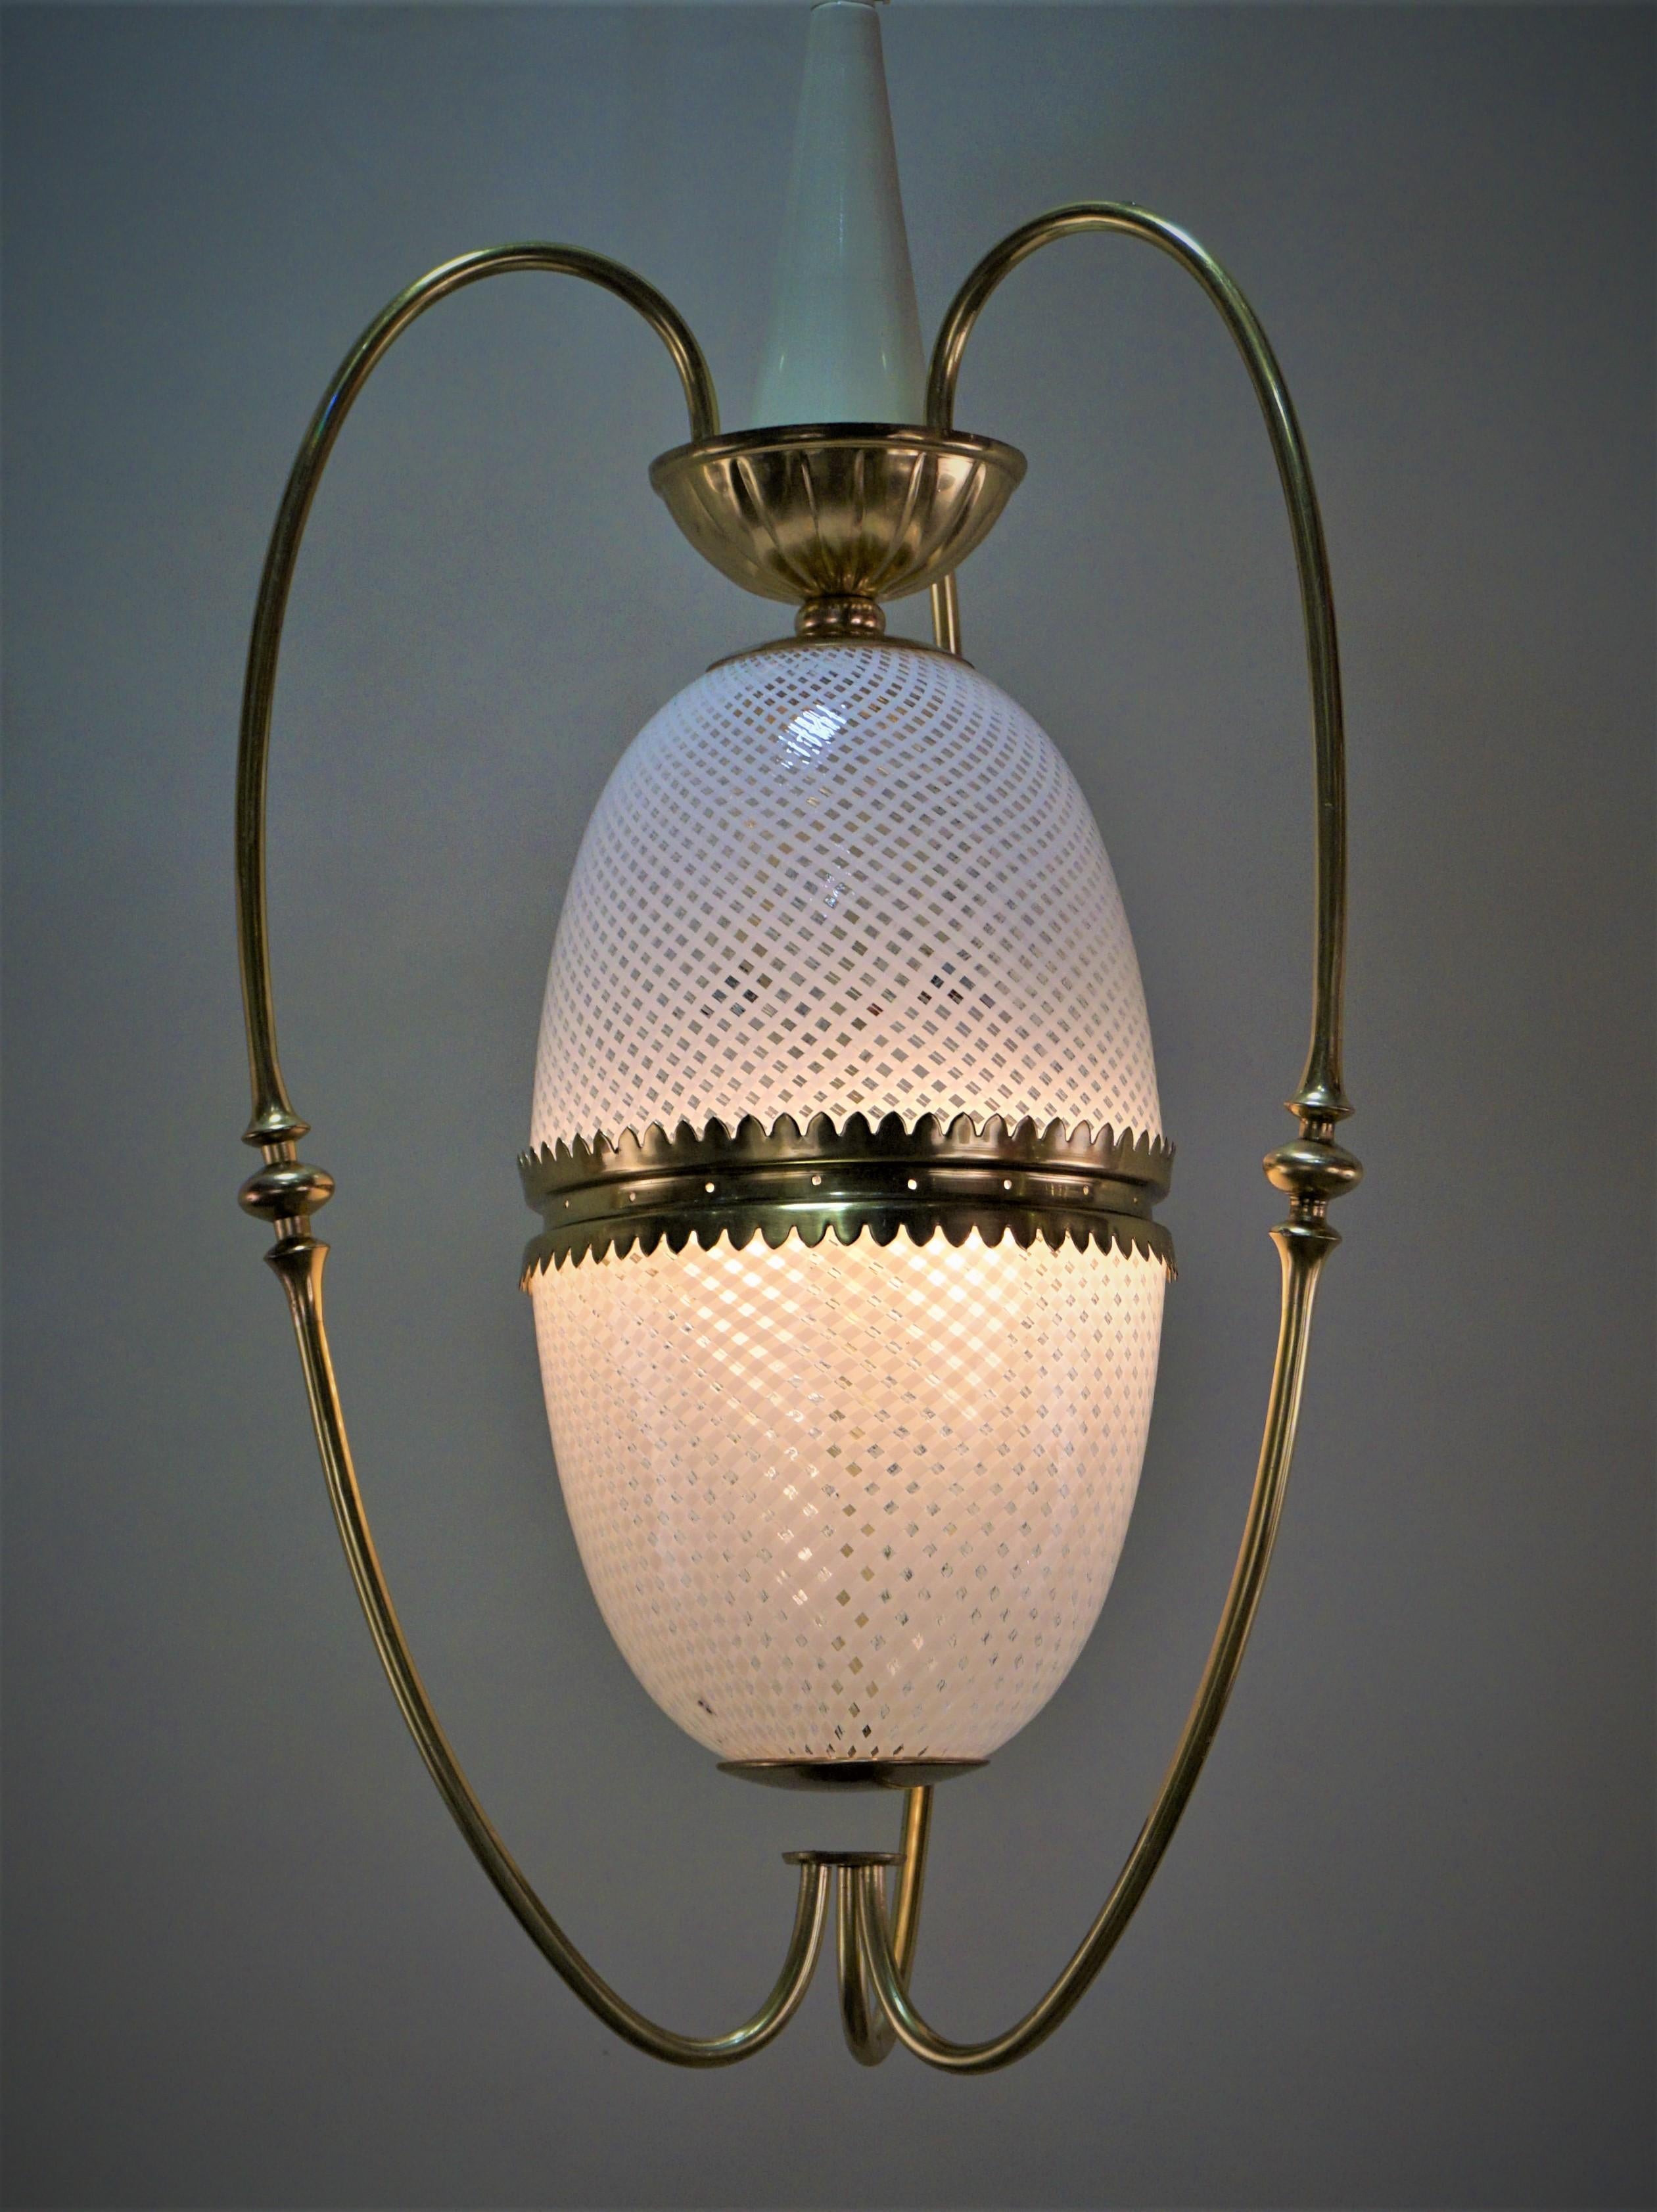 Hand blown Murano glass lantern with bronze frame.
The glass part only 11.5